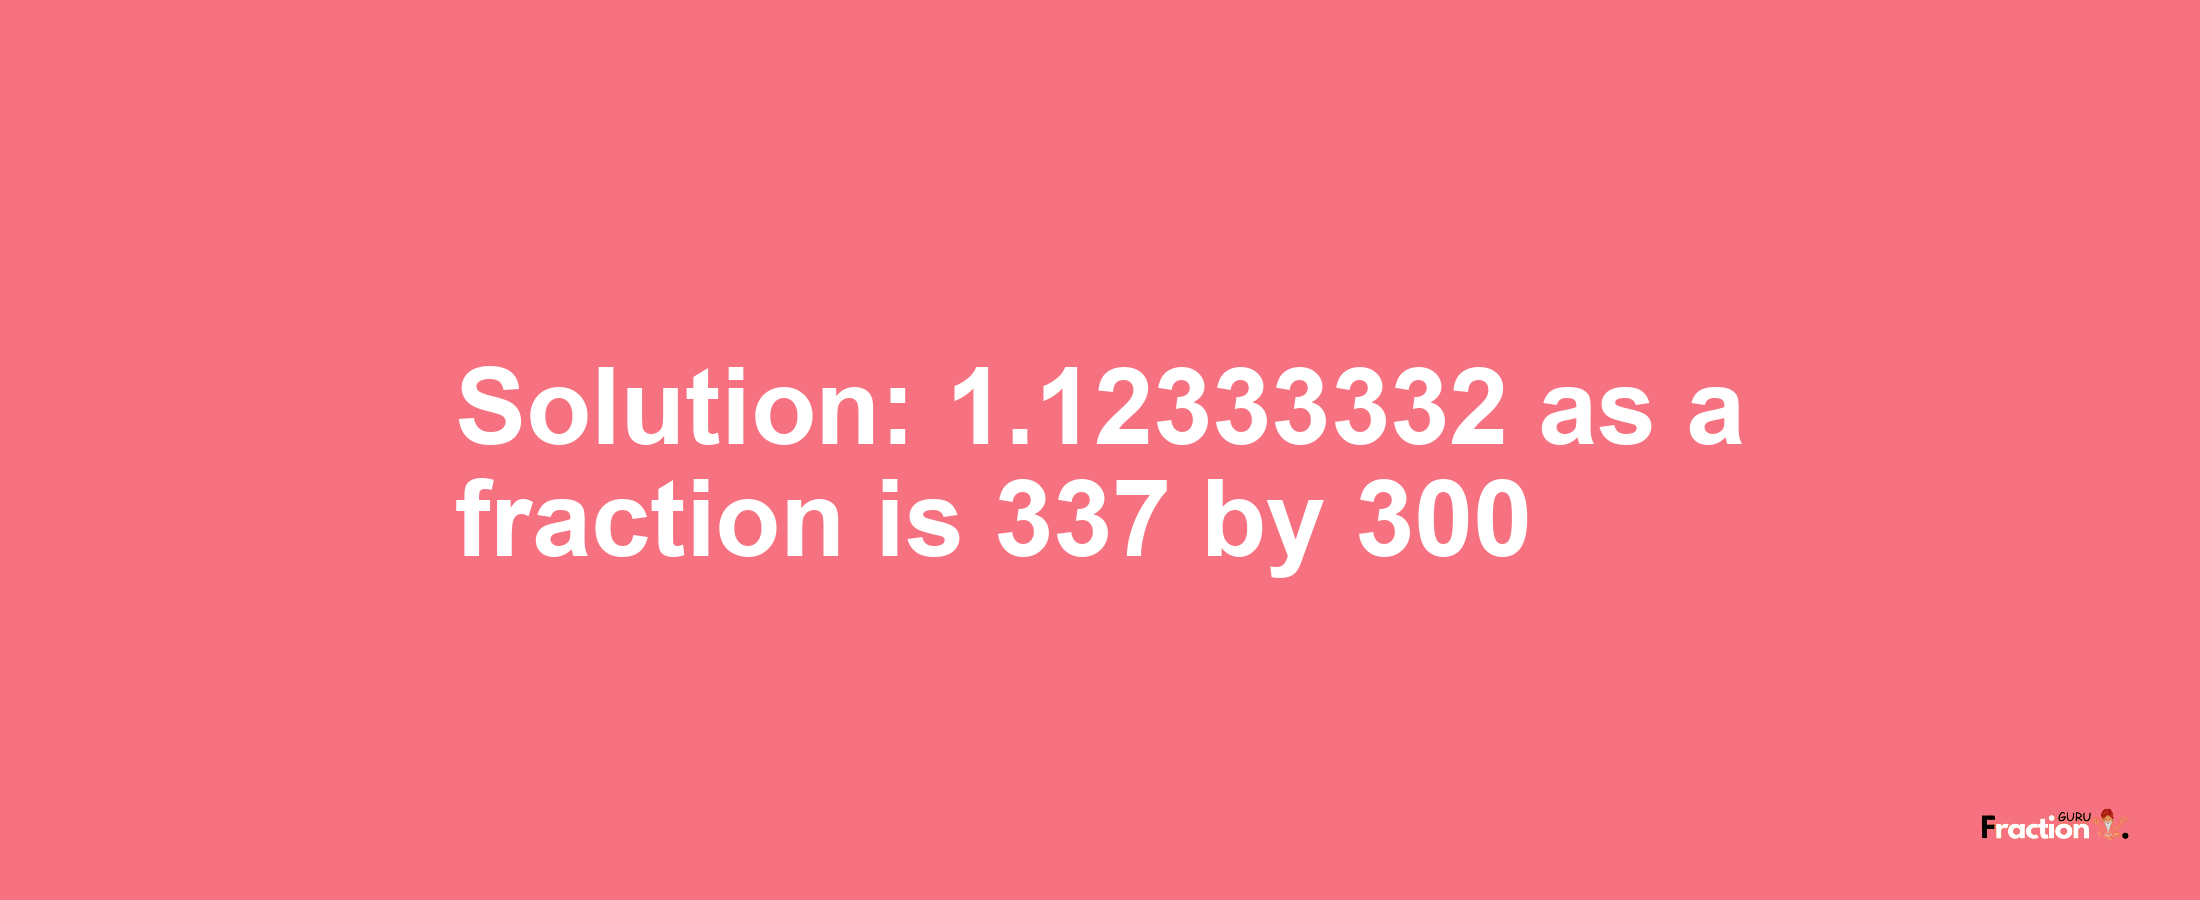 Solution:1.12333332 as a fraction is 337/300